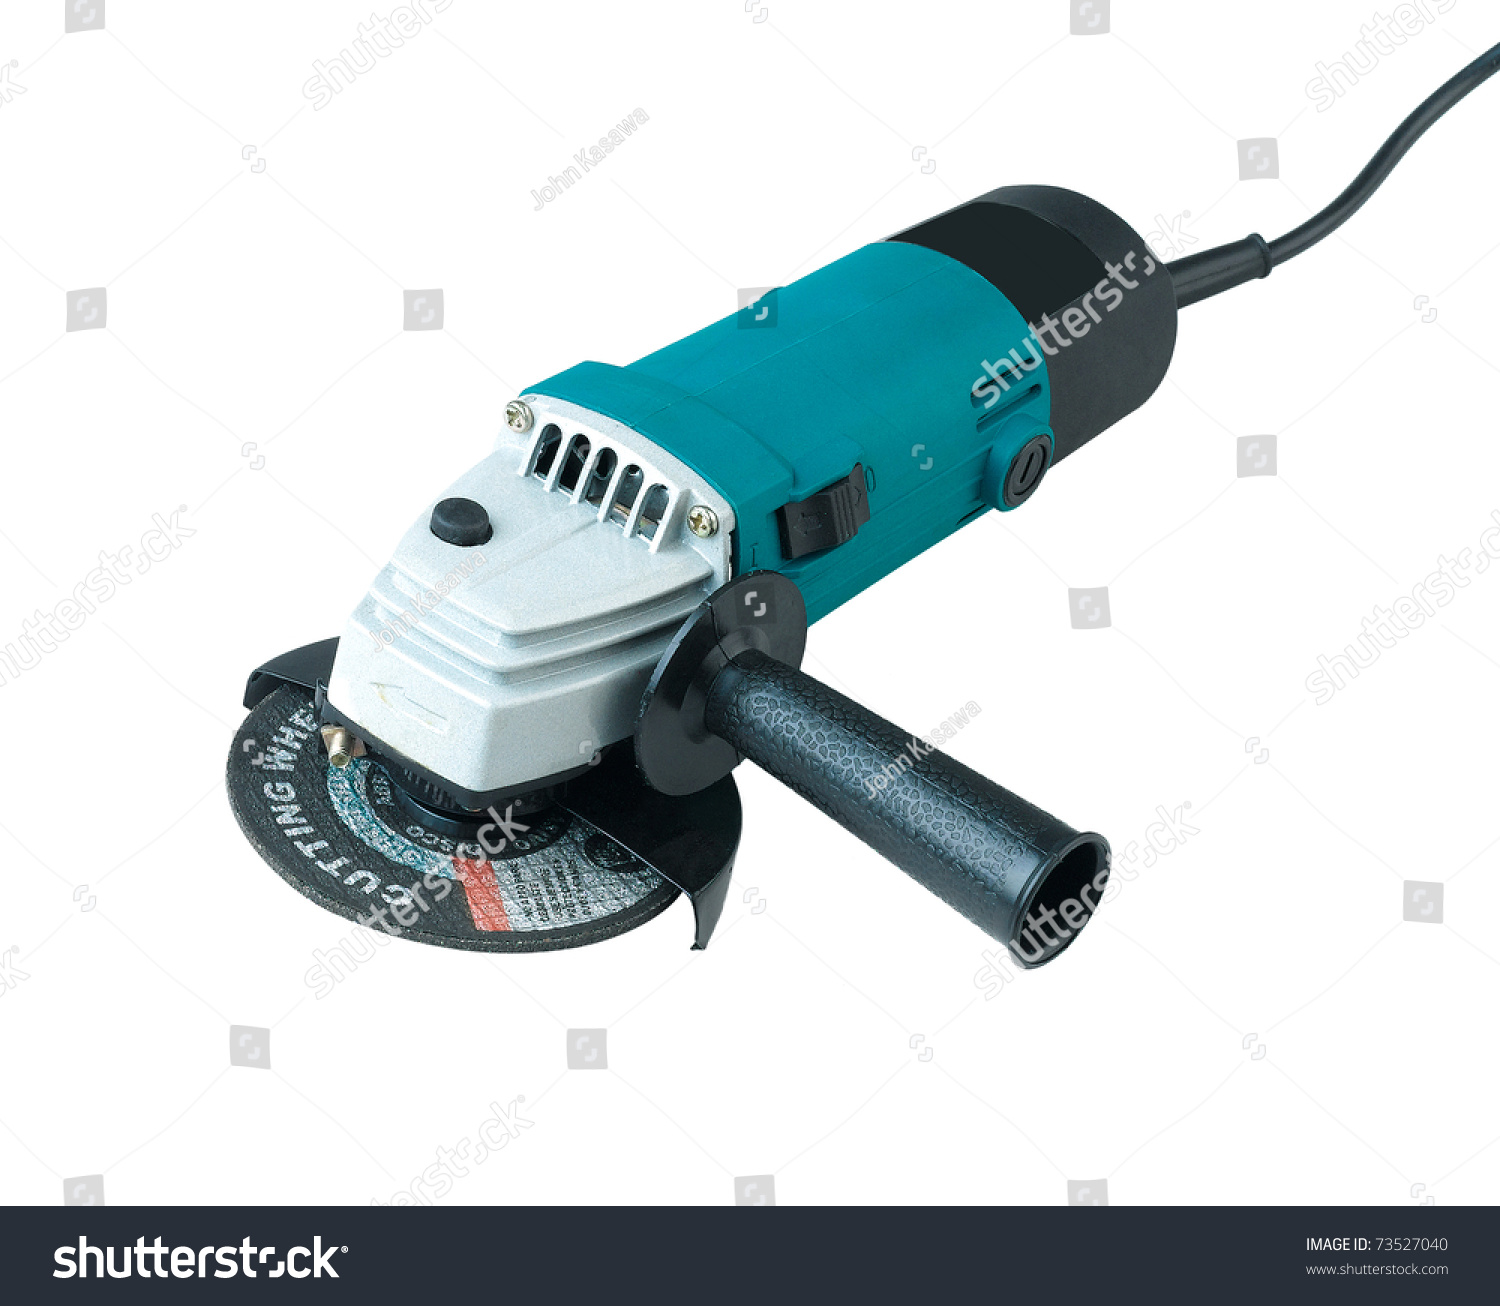 stock-photo-grinder-machine-with-cutting-wheel-isolated-on-white-73527040.jpg